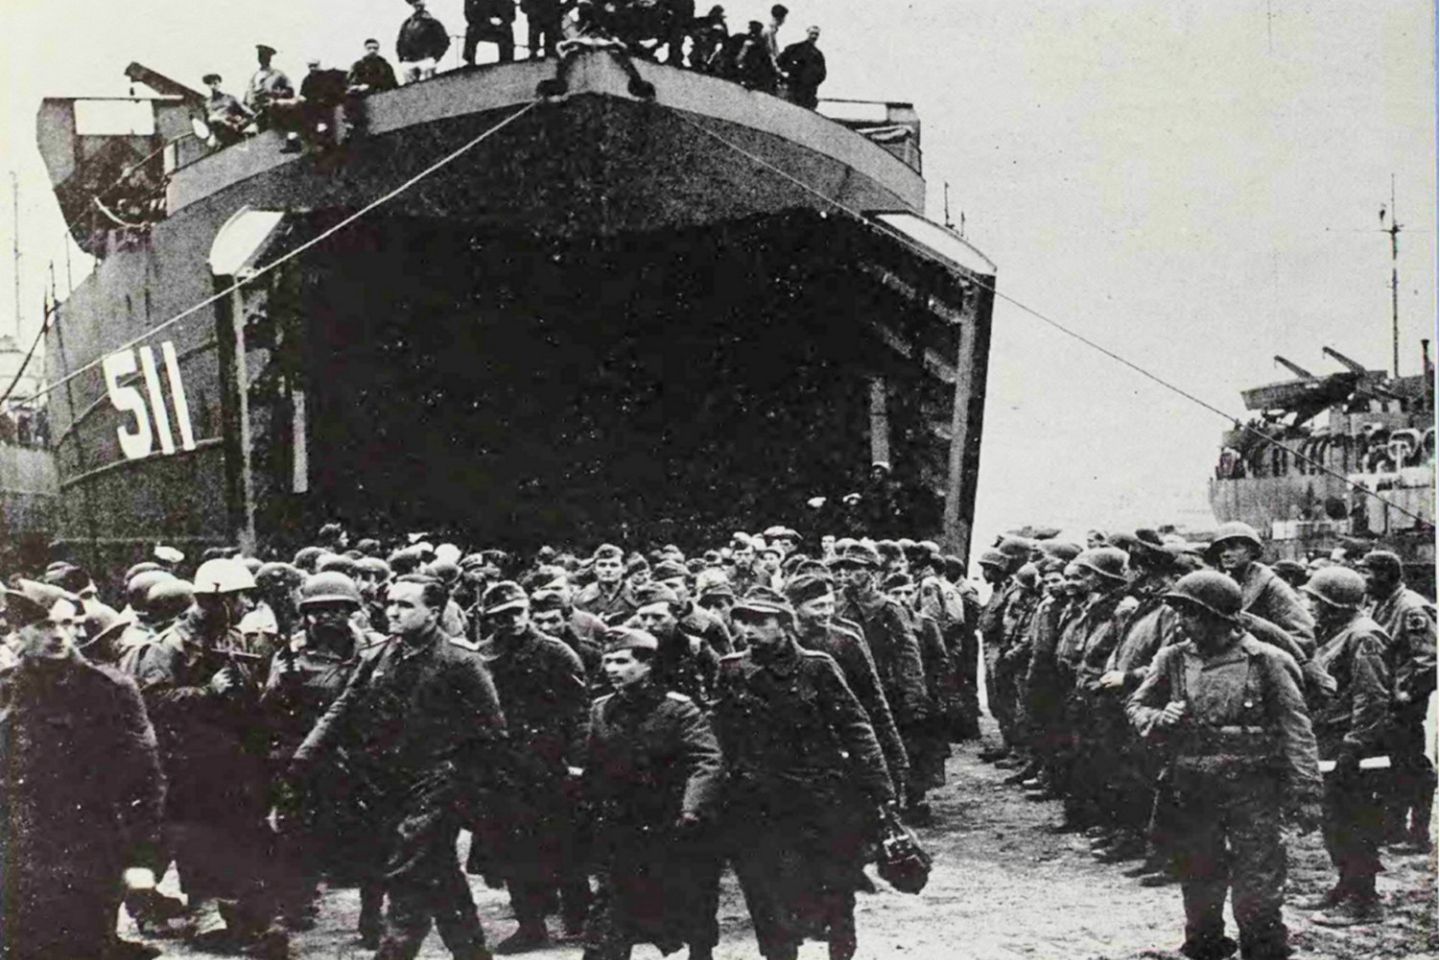 USS LST511 offloading German POWs at a British port in 1944.